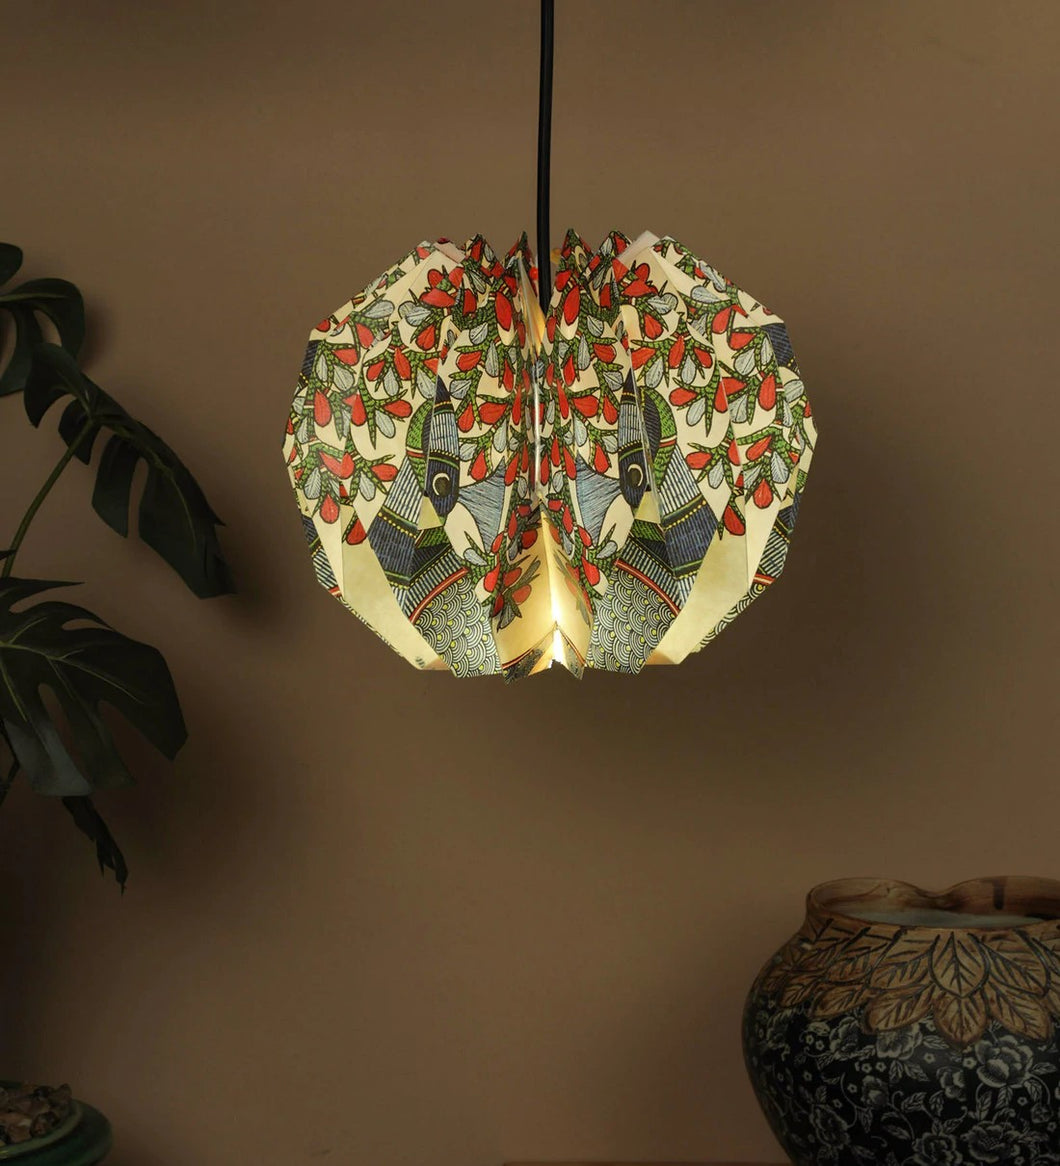 GOND ART LARGE COLLAPSIBLE DAHLIA ORIGAMI HANGING LAMPSHADE